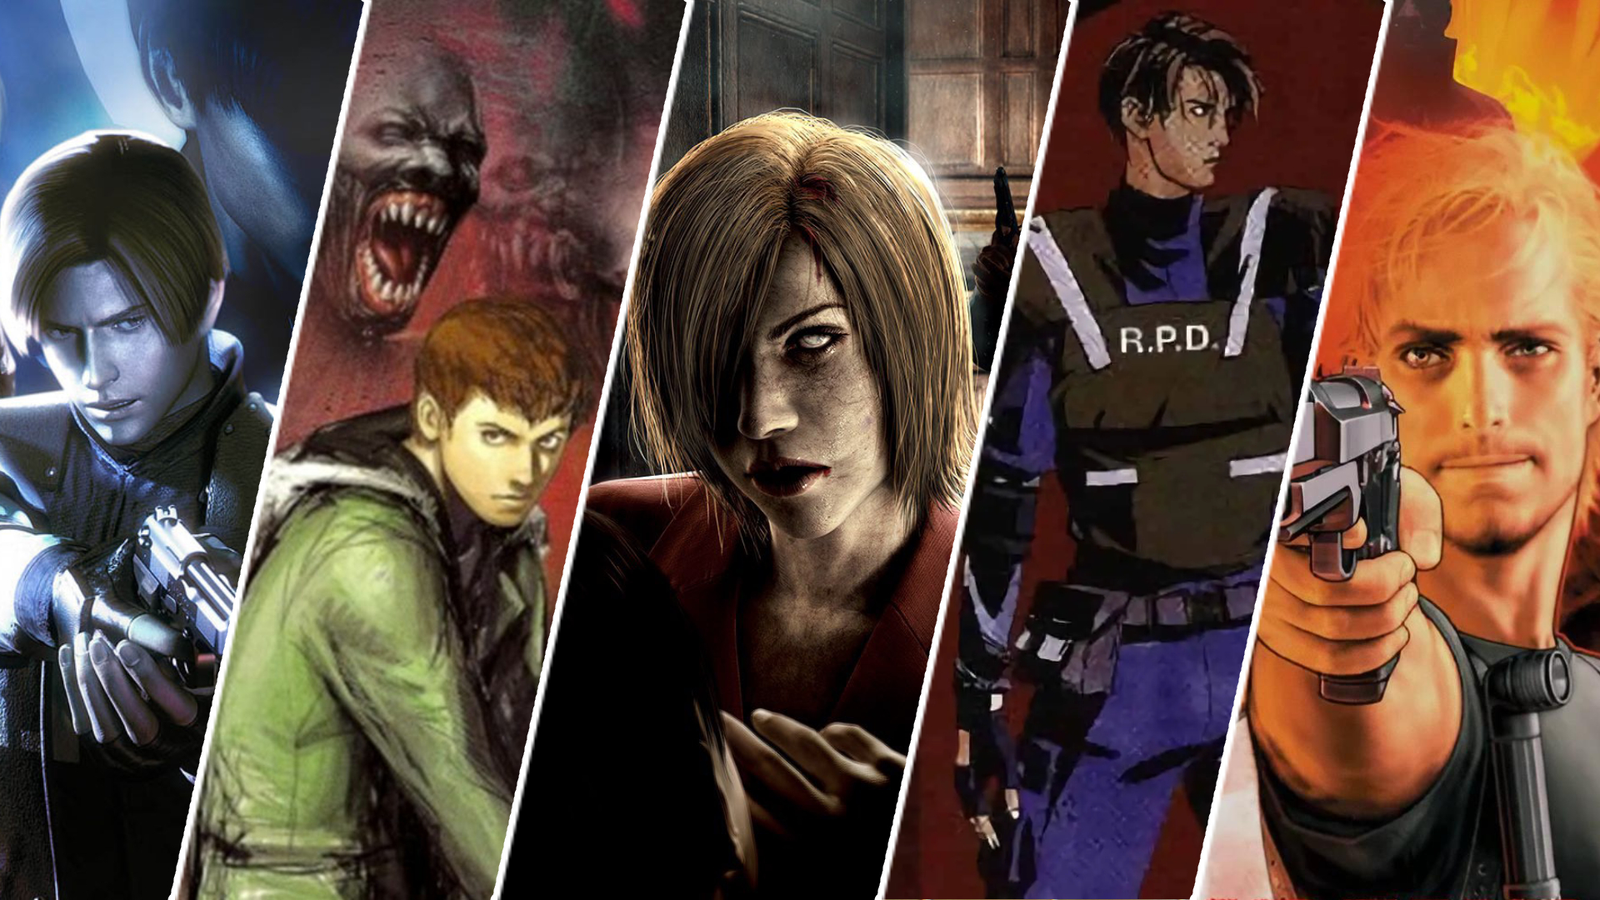 Finished Resident Evil 4 Remake? Here are 6 Resident Evil Spin-offs you  probably haven't played